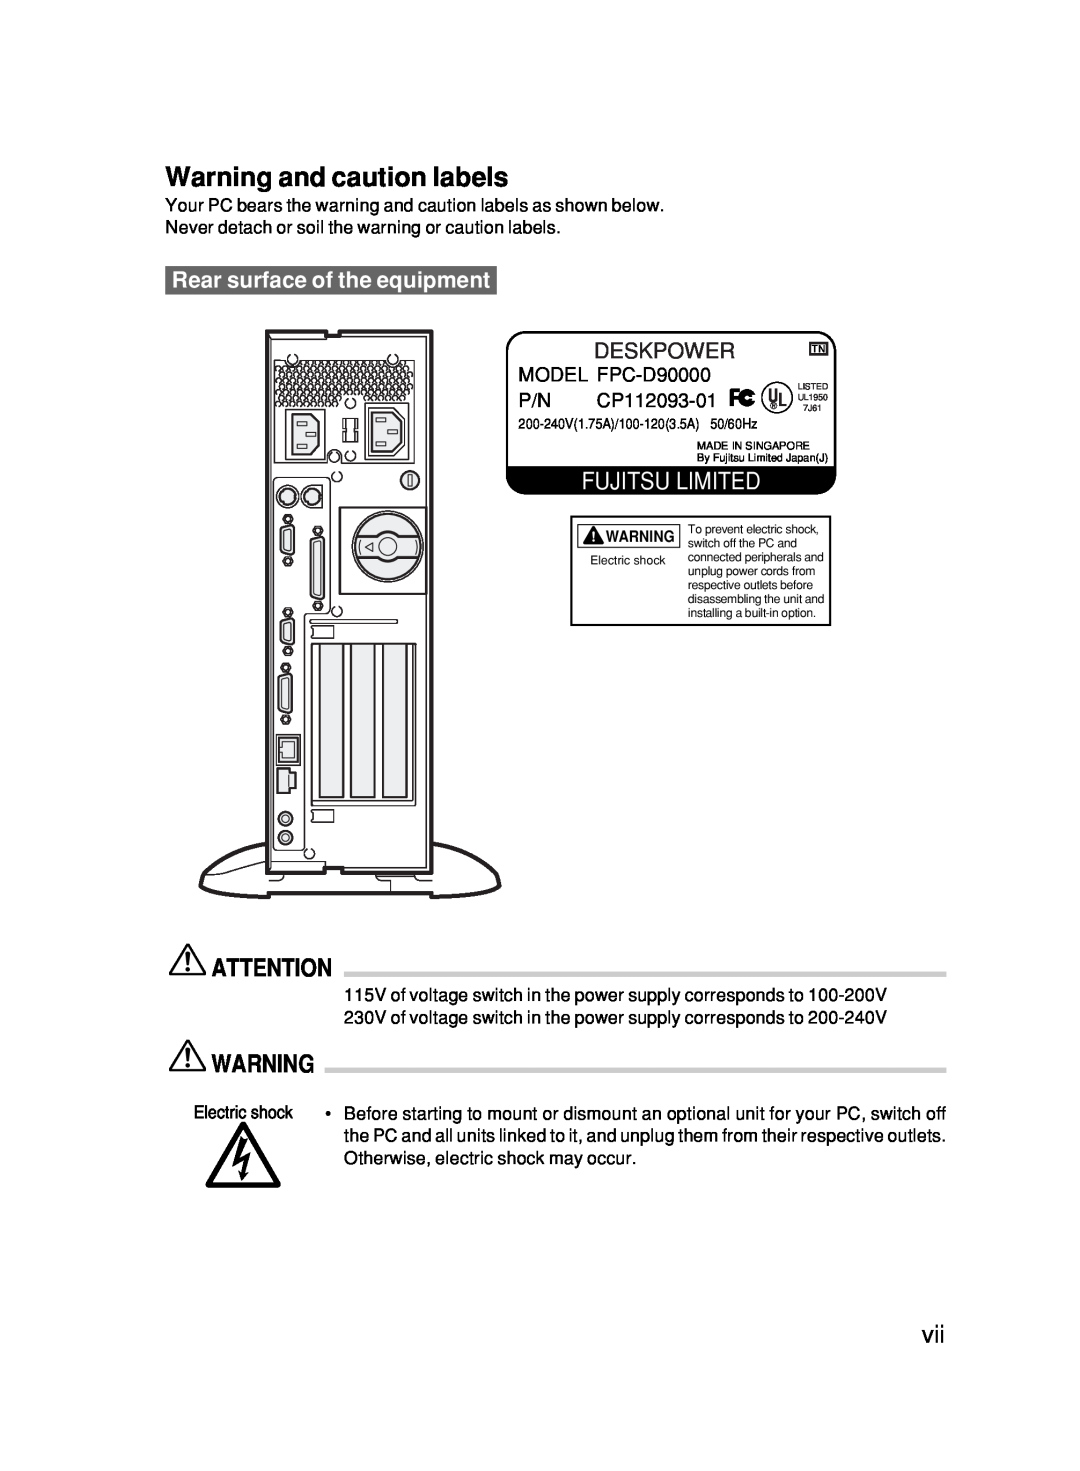 Fujitsu 500 Warning and caution labels, Rear surface of the equipment, Fujitsu Limited, Deskpower, MODEL FPC-D90000 